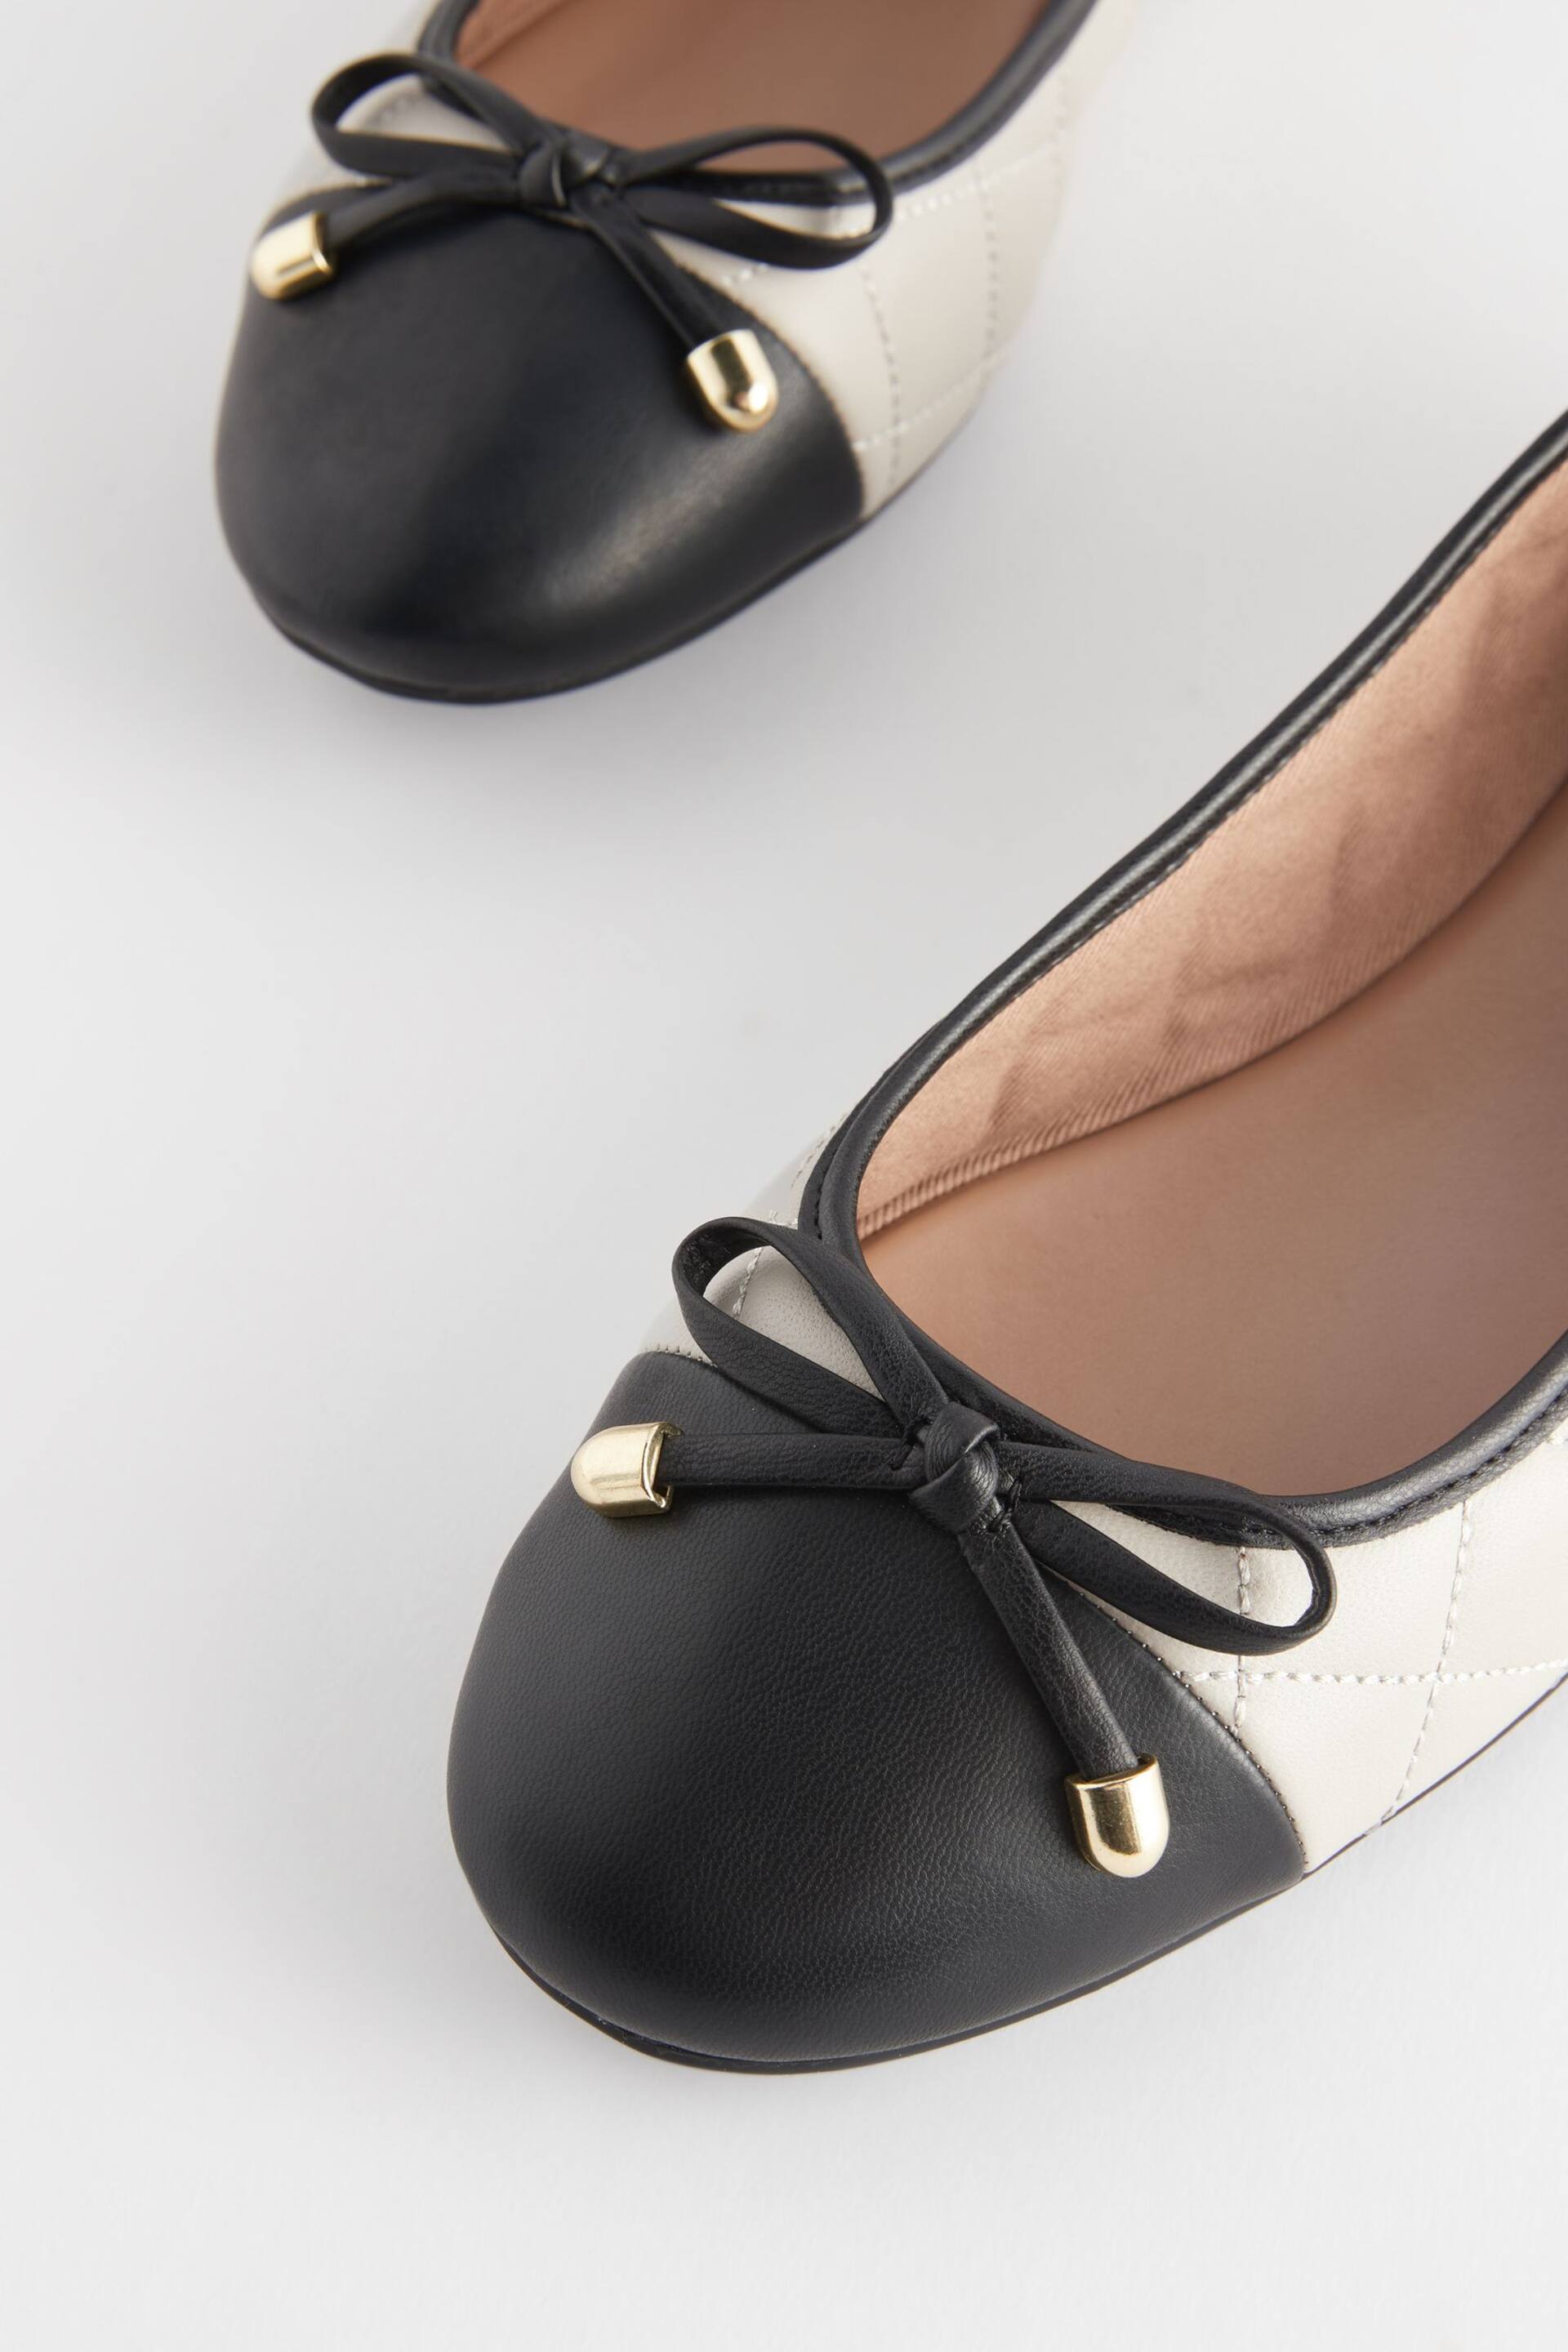 Monochrome Forever Comfort® Round Toe Leather Ballerina Shoes - Image 3 of 5